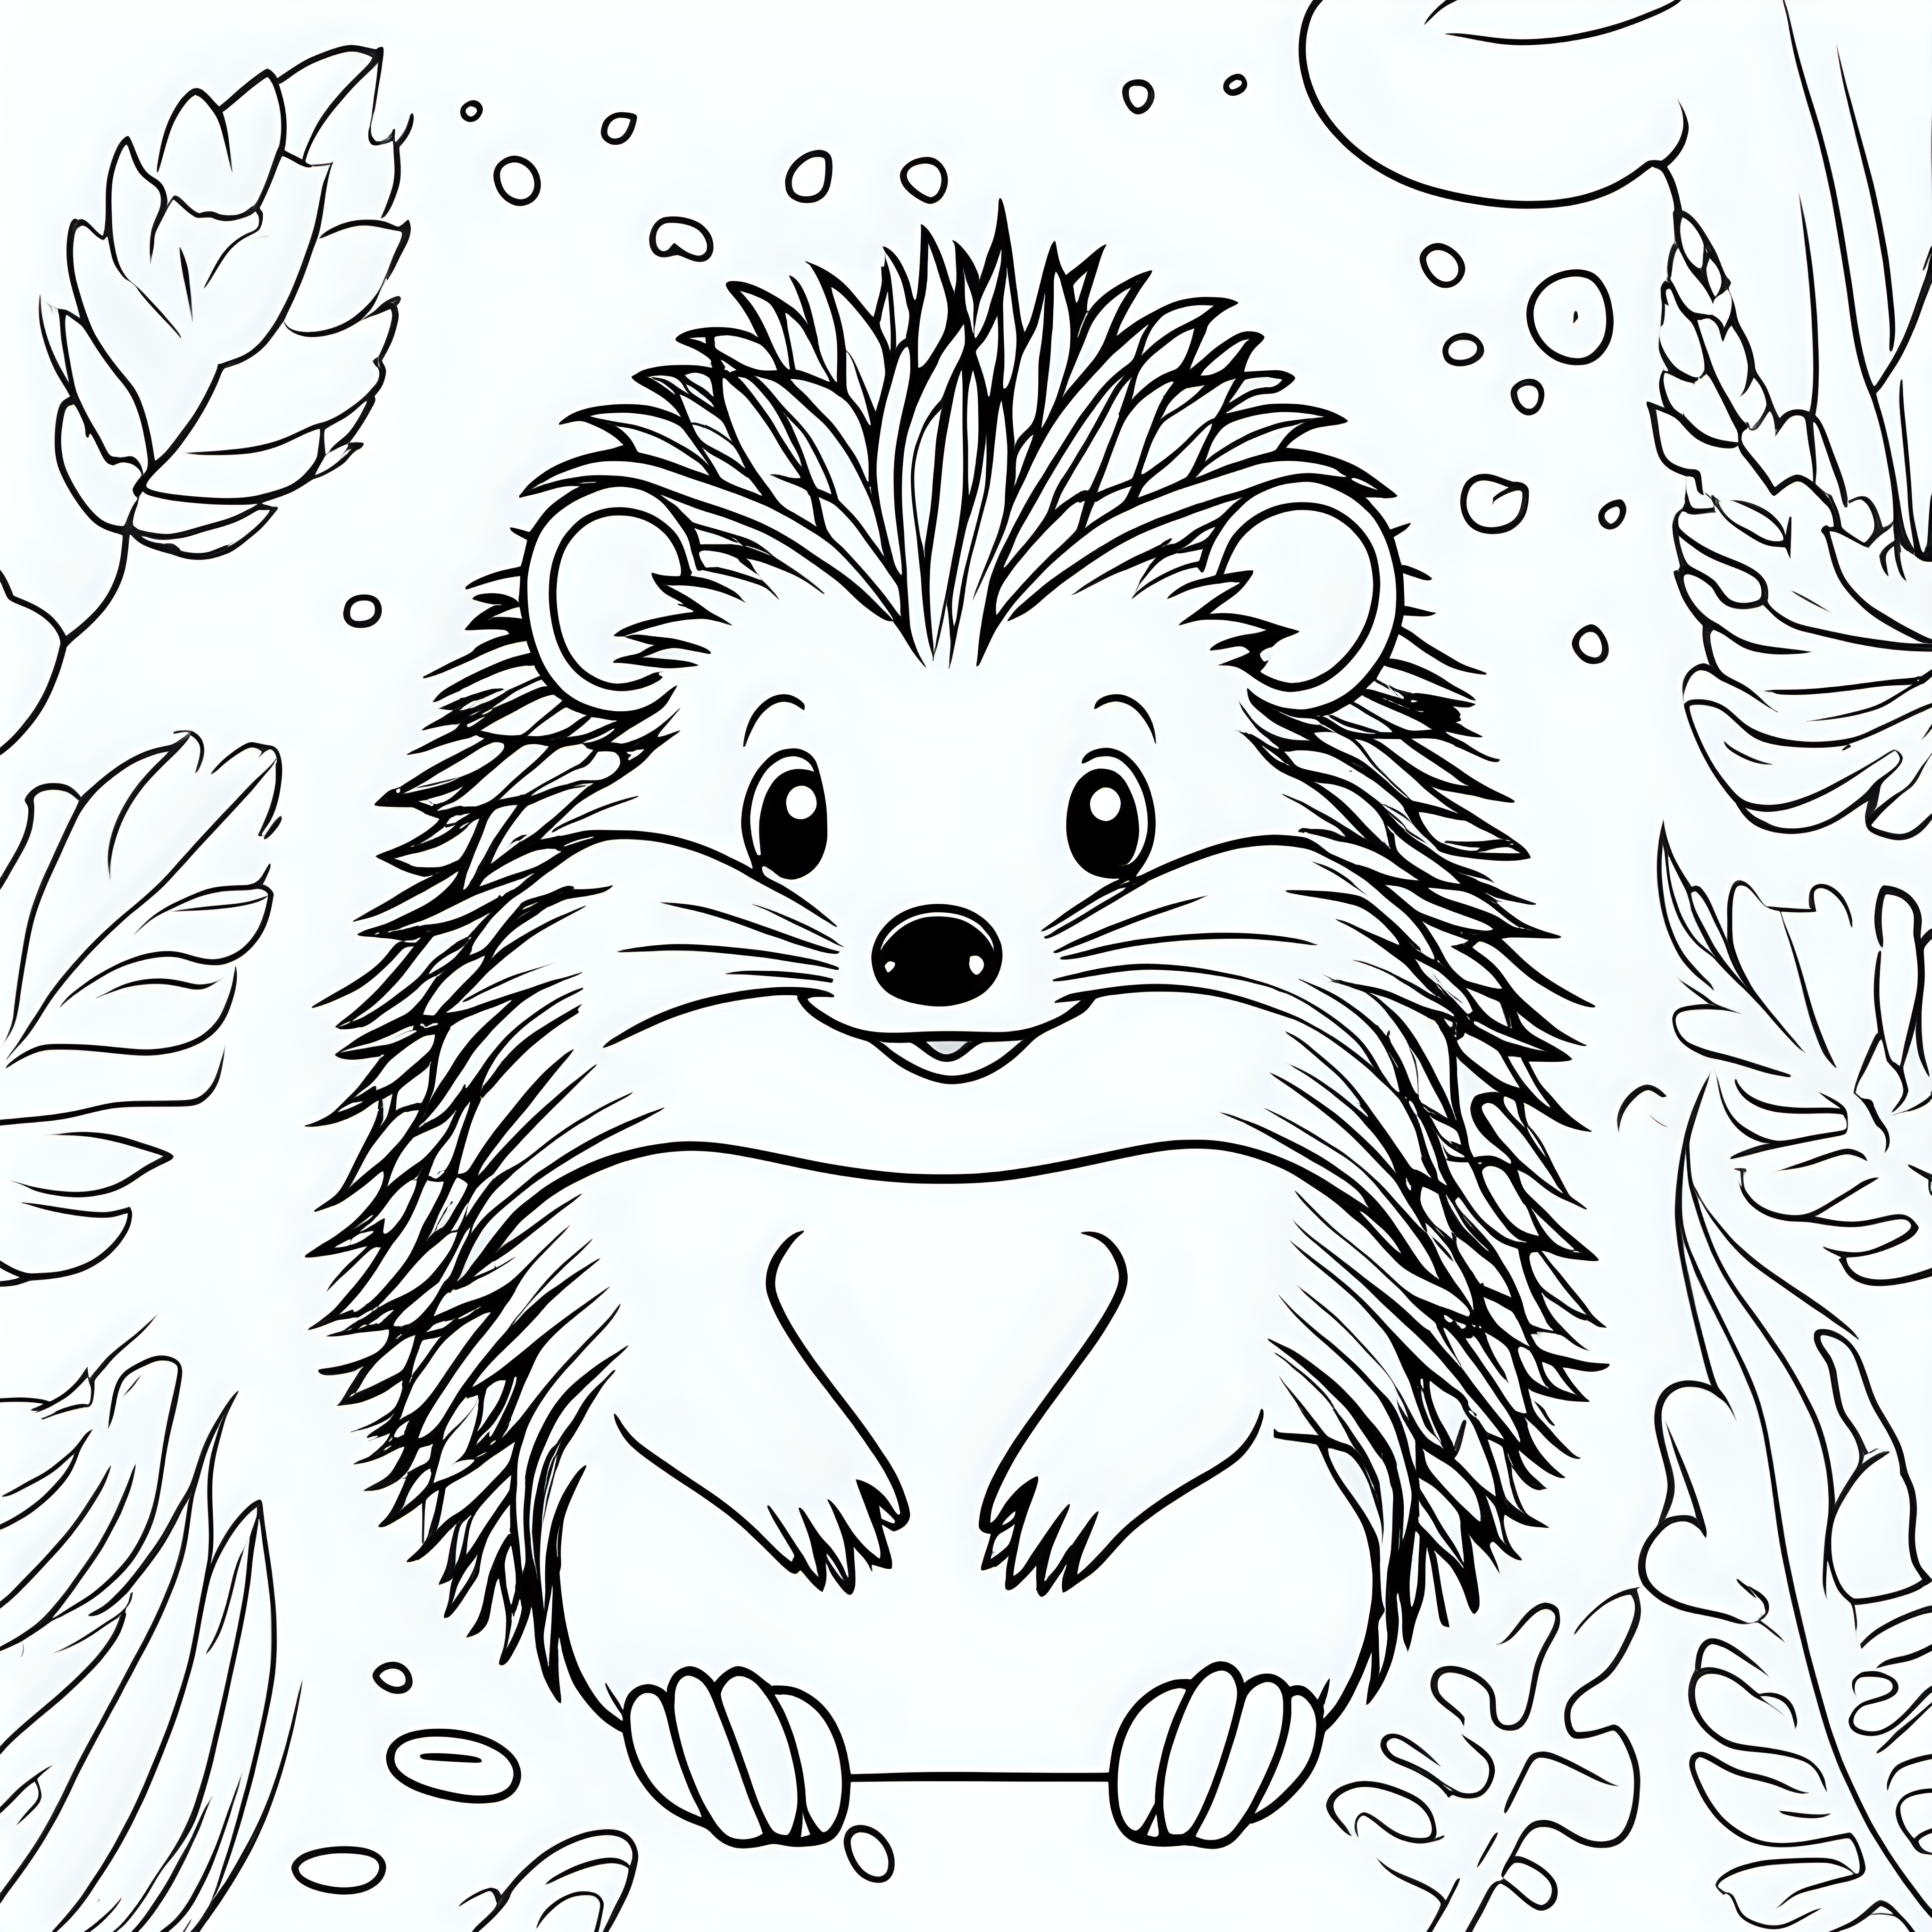 draw a cute Hedgehog with only the outline  for a coloring book